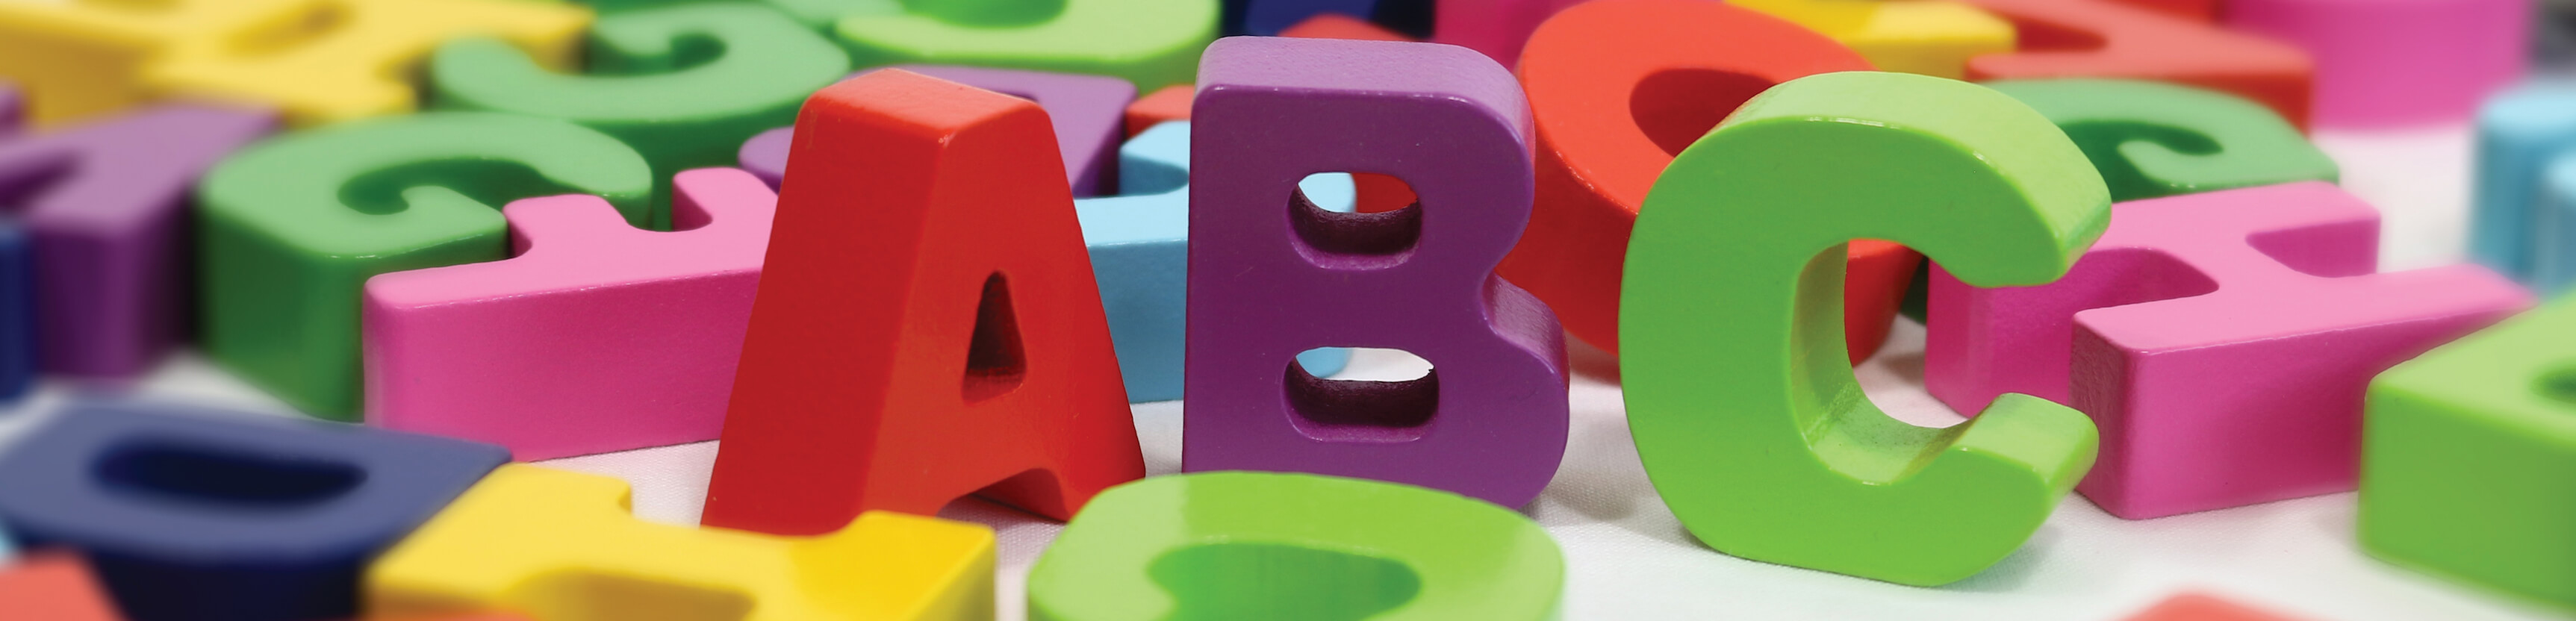 A group of different-colored, letter blocks with the letters A, B, and C standing in the middle